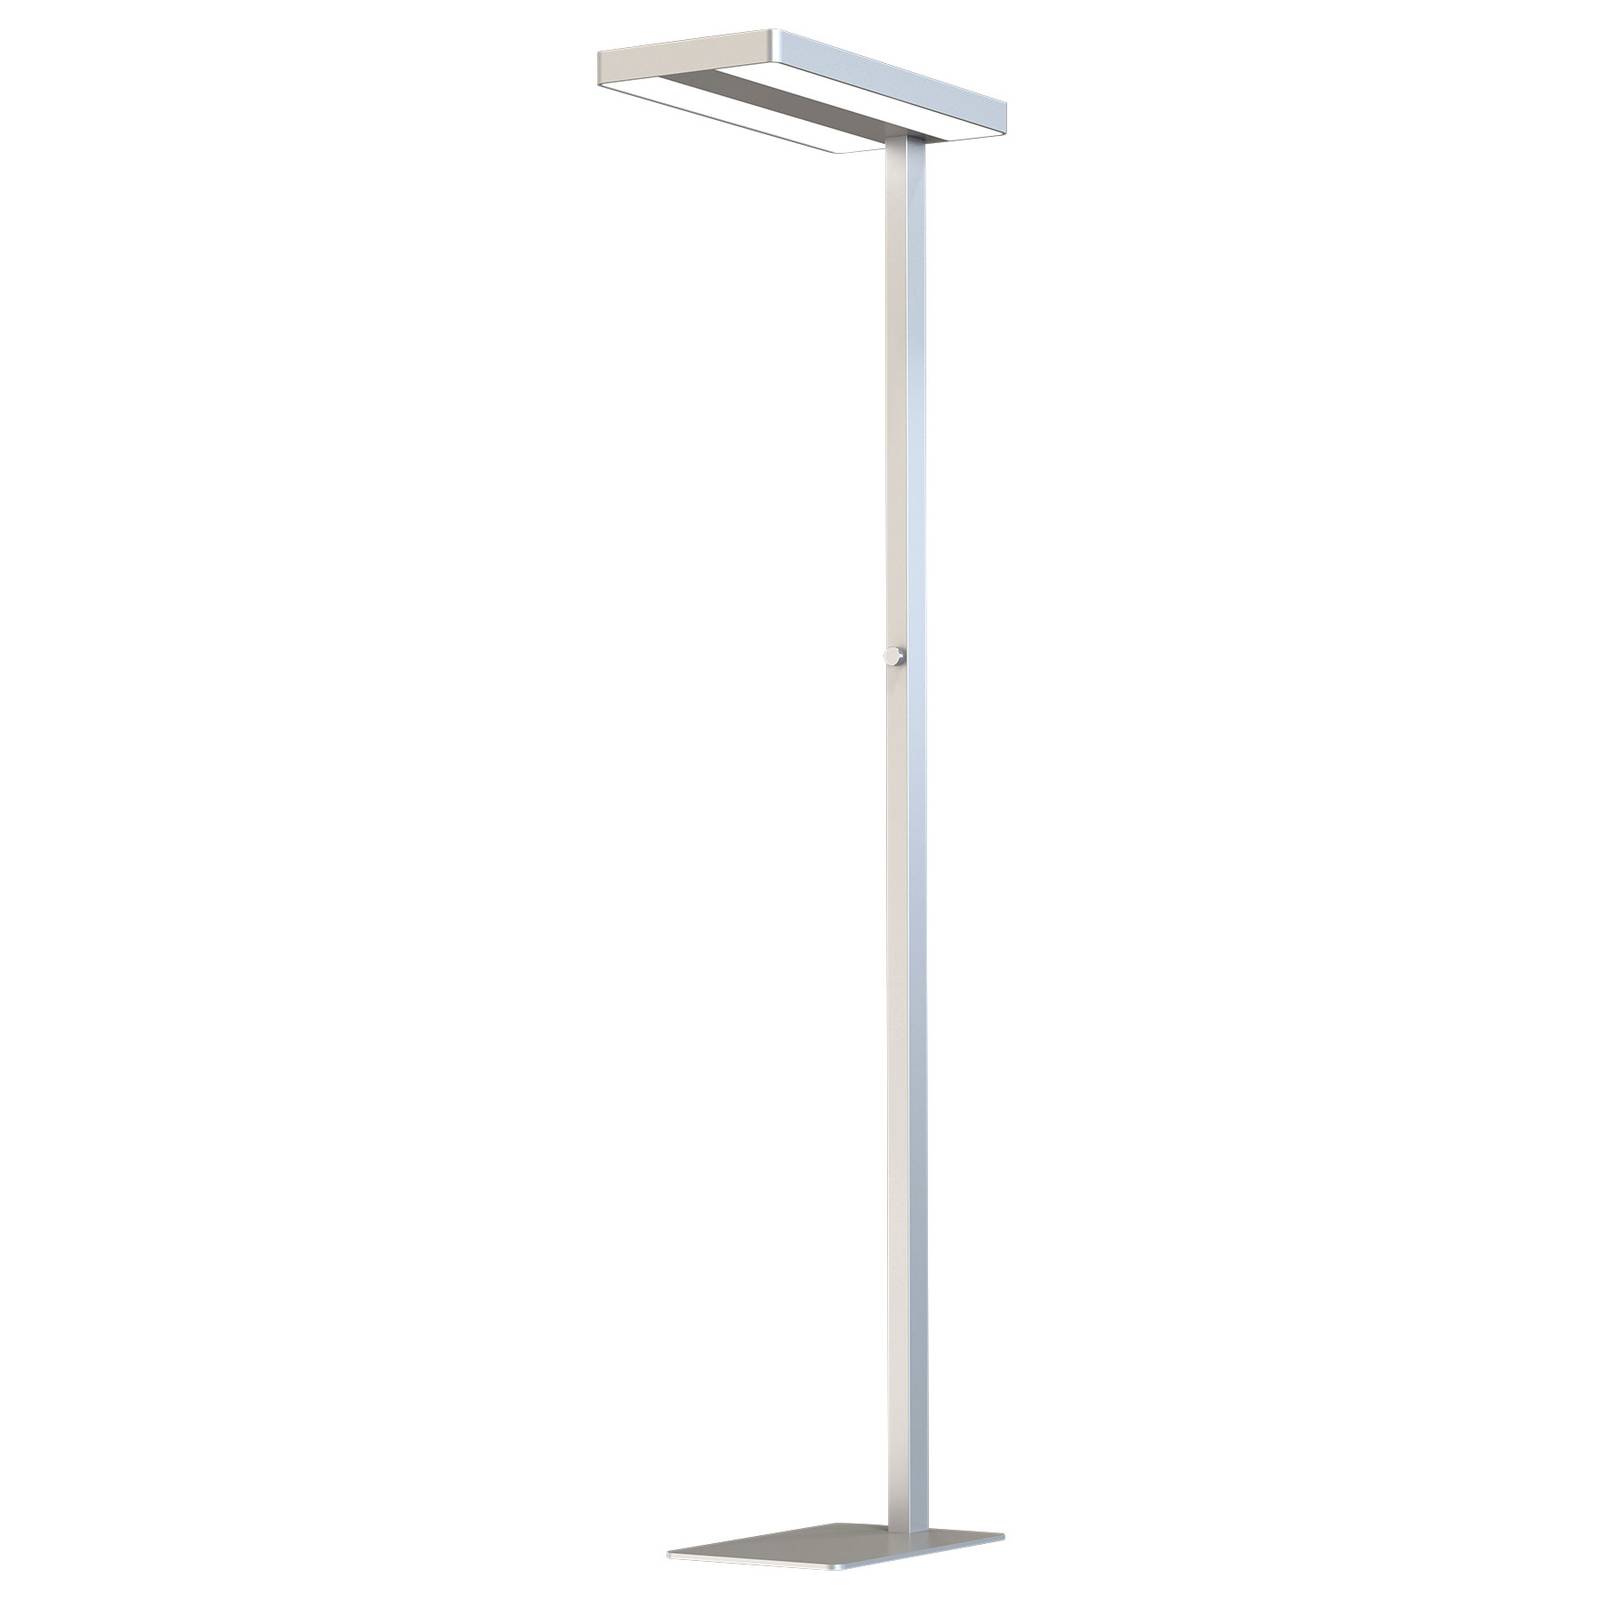 LED-Stehlampe Office up/down 4000K dimmbar silber